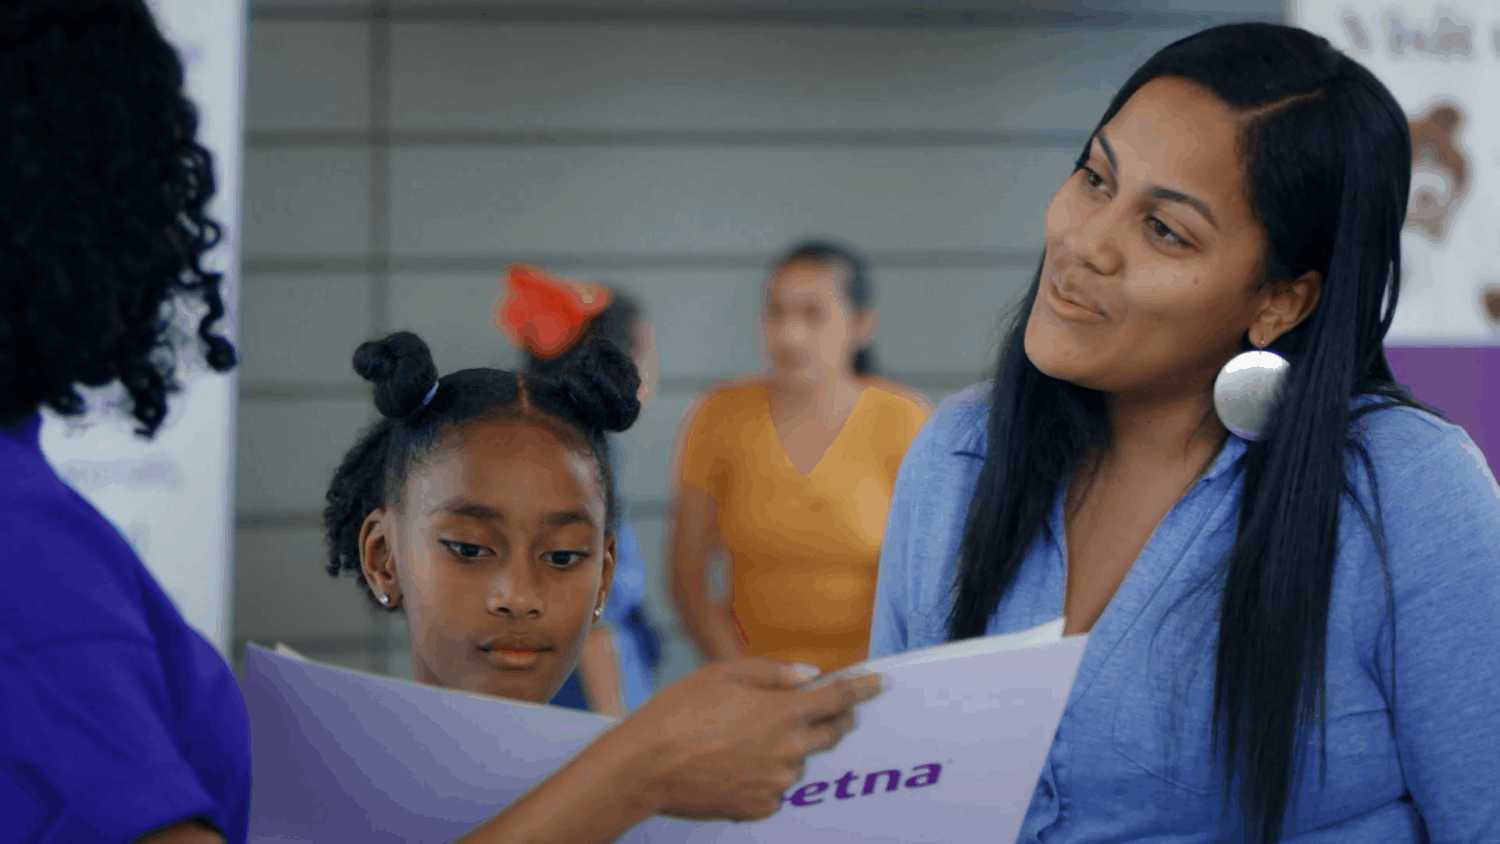 AETNA healthcare member reads over plans with her daughter